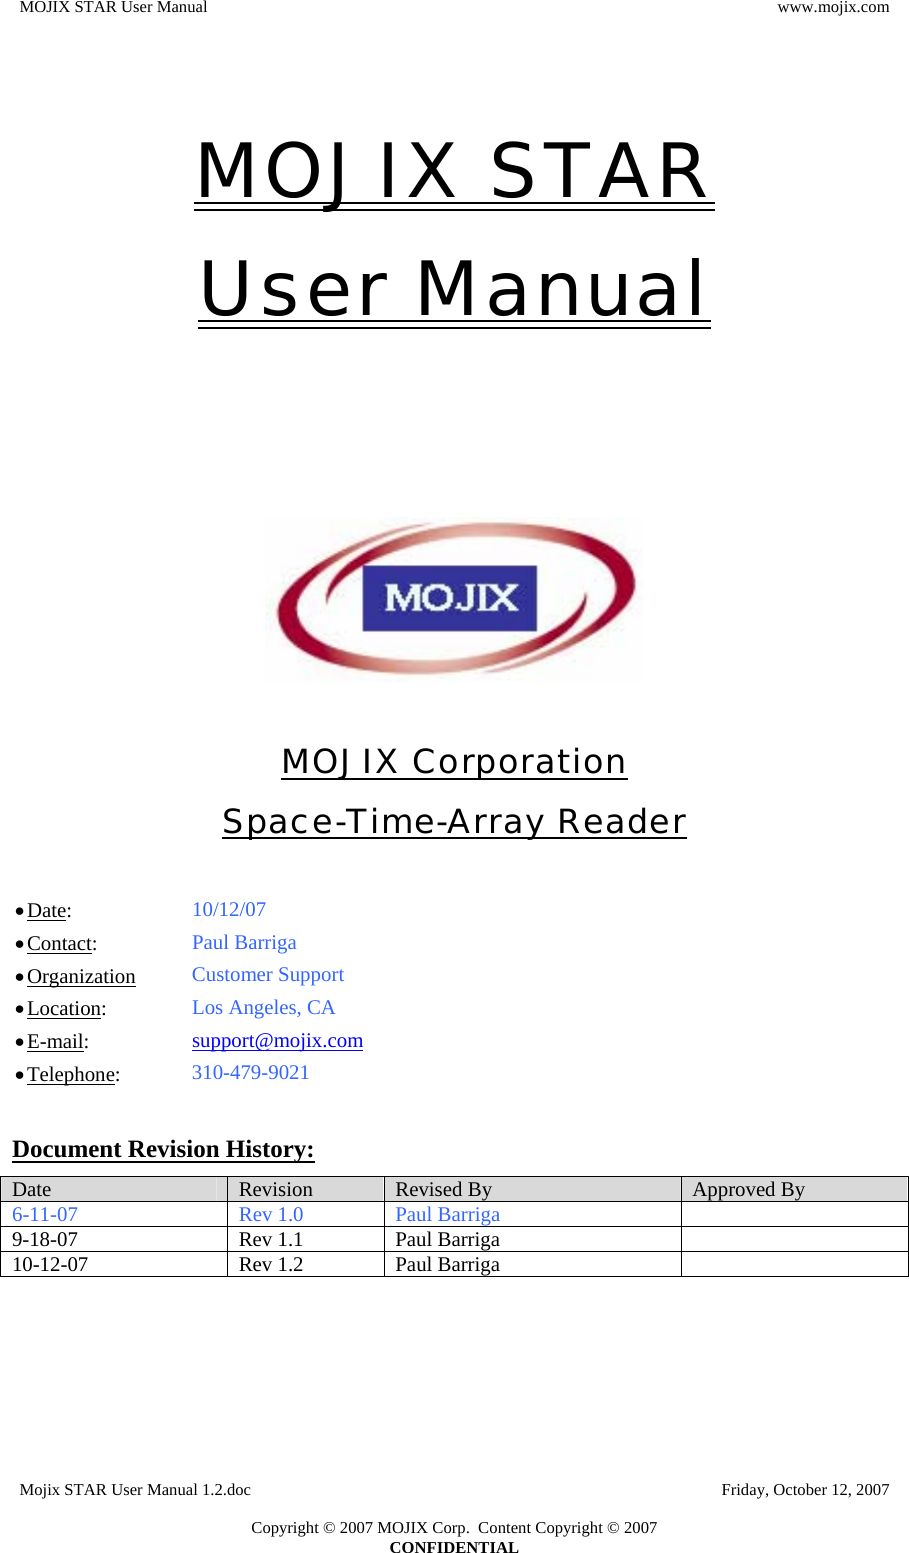 MOJIX STAR User Manual  www.mojix.com  MOJIX STAR User Manual      MOJIX Corporation Space-Time-Array Reader  • Date:   10/12/07 • Contact:  Paul Barriga • Organization Customer Support • Location:  Los Angeles, CA • E-mail:  support@mojix.com• Telephone:  310-479-9021  Document Revision History: Date  Revision  Revised By  Approved By 6-11-07 Rev 1.0 Paul Barriga  9-18-07 Rev 1.1 Paul Barriga   10-12-07 Rev 1.2 Paul Barriga    Mojix STAR User Manual 1.2.doc    Friday, October 12, 2007  Copyright © 2007 MOJIX Corp.  Content Copyright © 2007 CONFIDENTIAL 